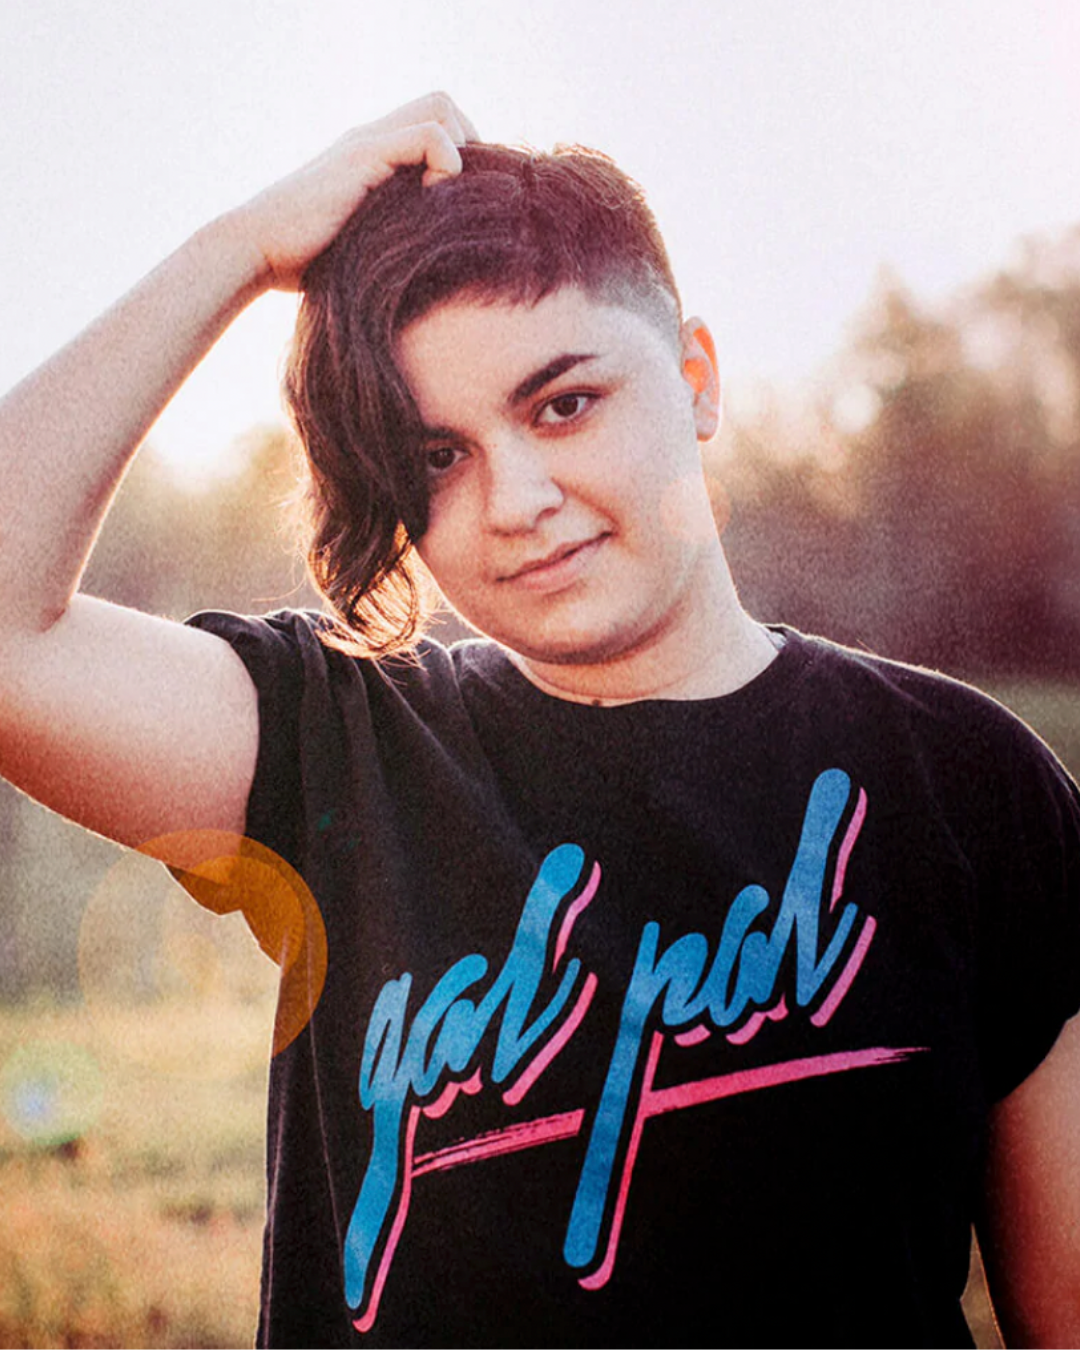 Model Marisa is wearing the Gal Pal Black Tee in size M. She is 5'3" and her bra size is 36C. The tee is black and has a graphic that says "gal pal" in retro 80s grafitti cursive typeface. The text is neon blue with a black outline and neon pink drop shadow. The text is underlined by a swipe of pink to resemble paint.